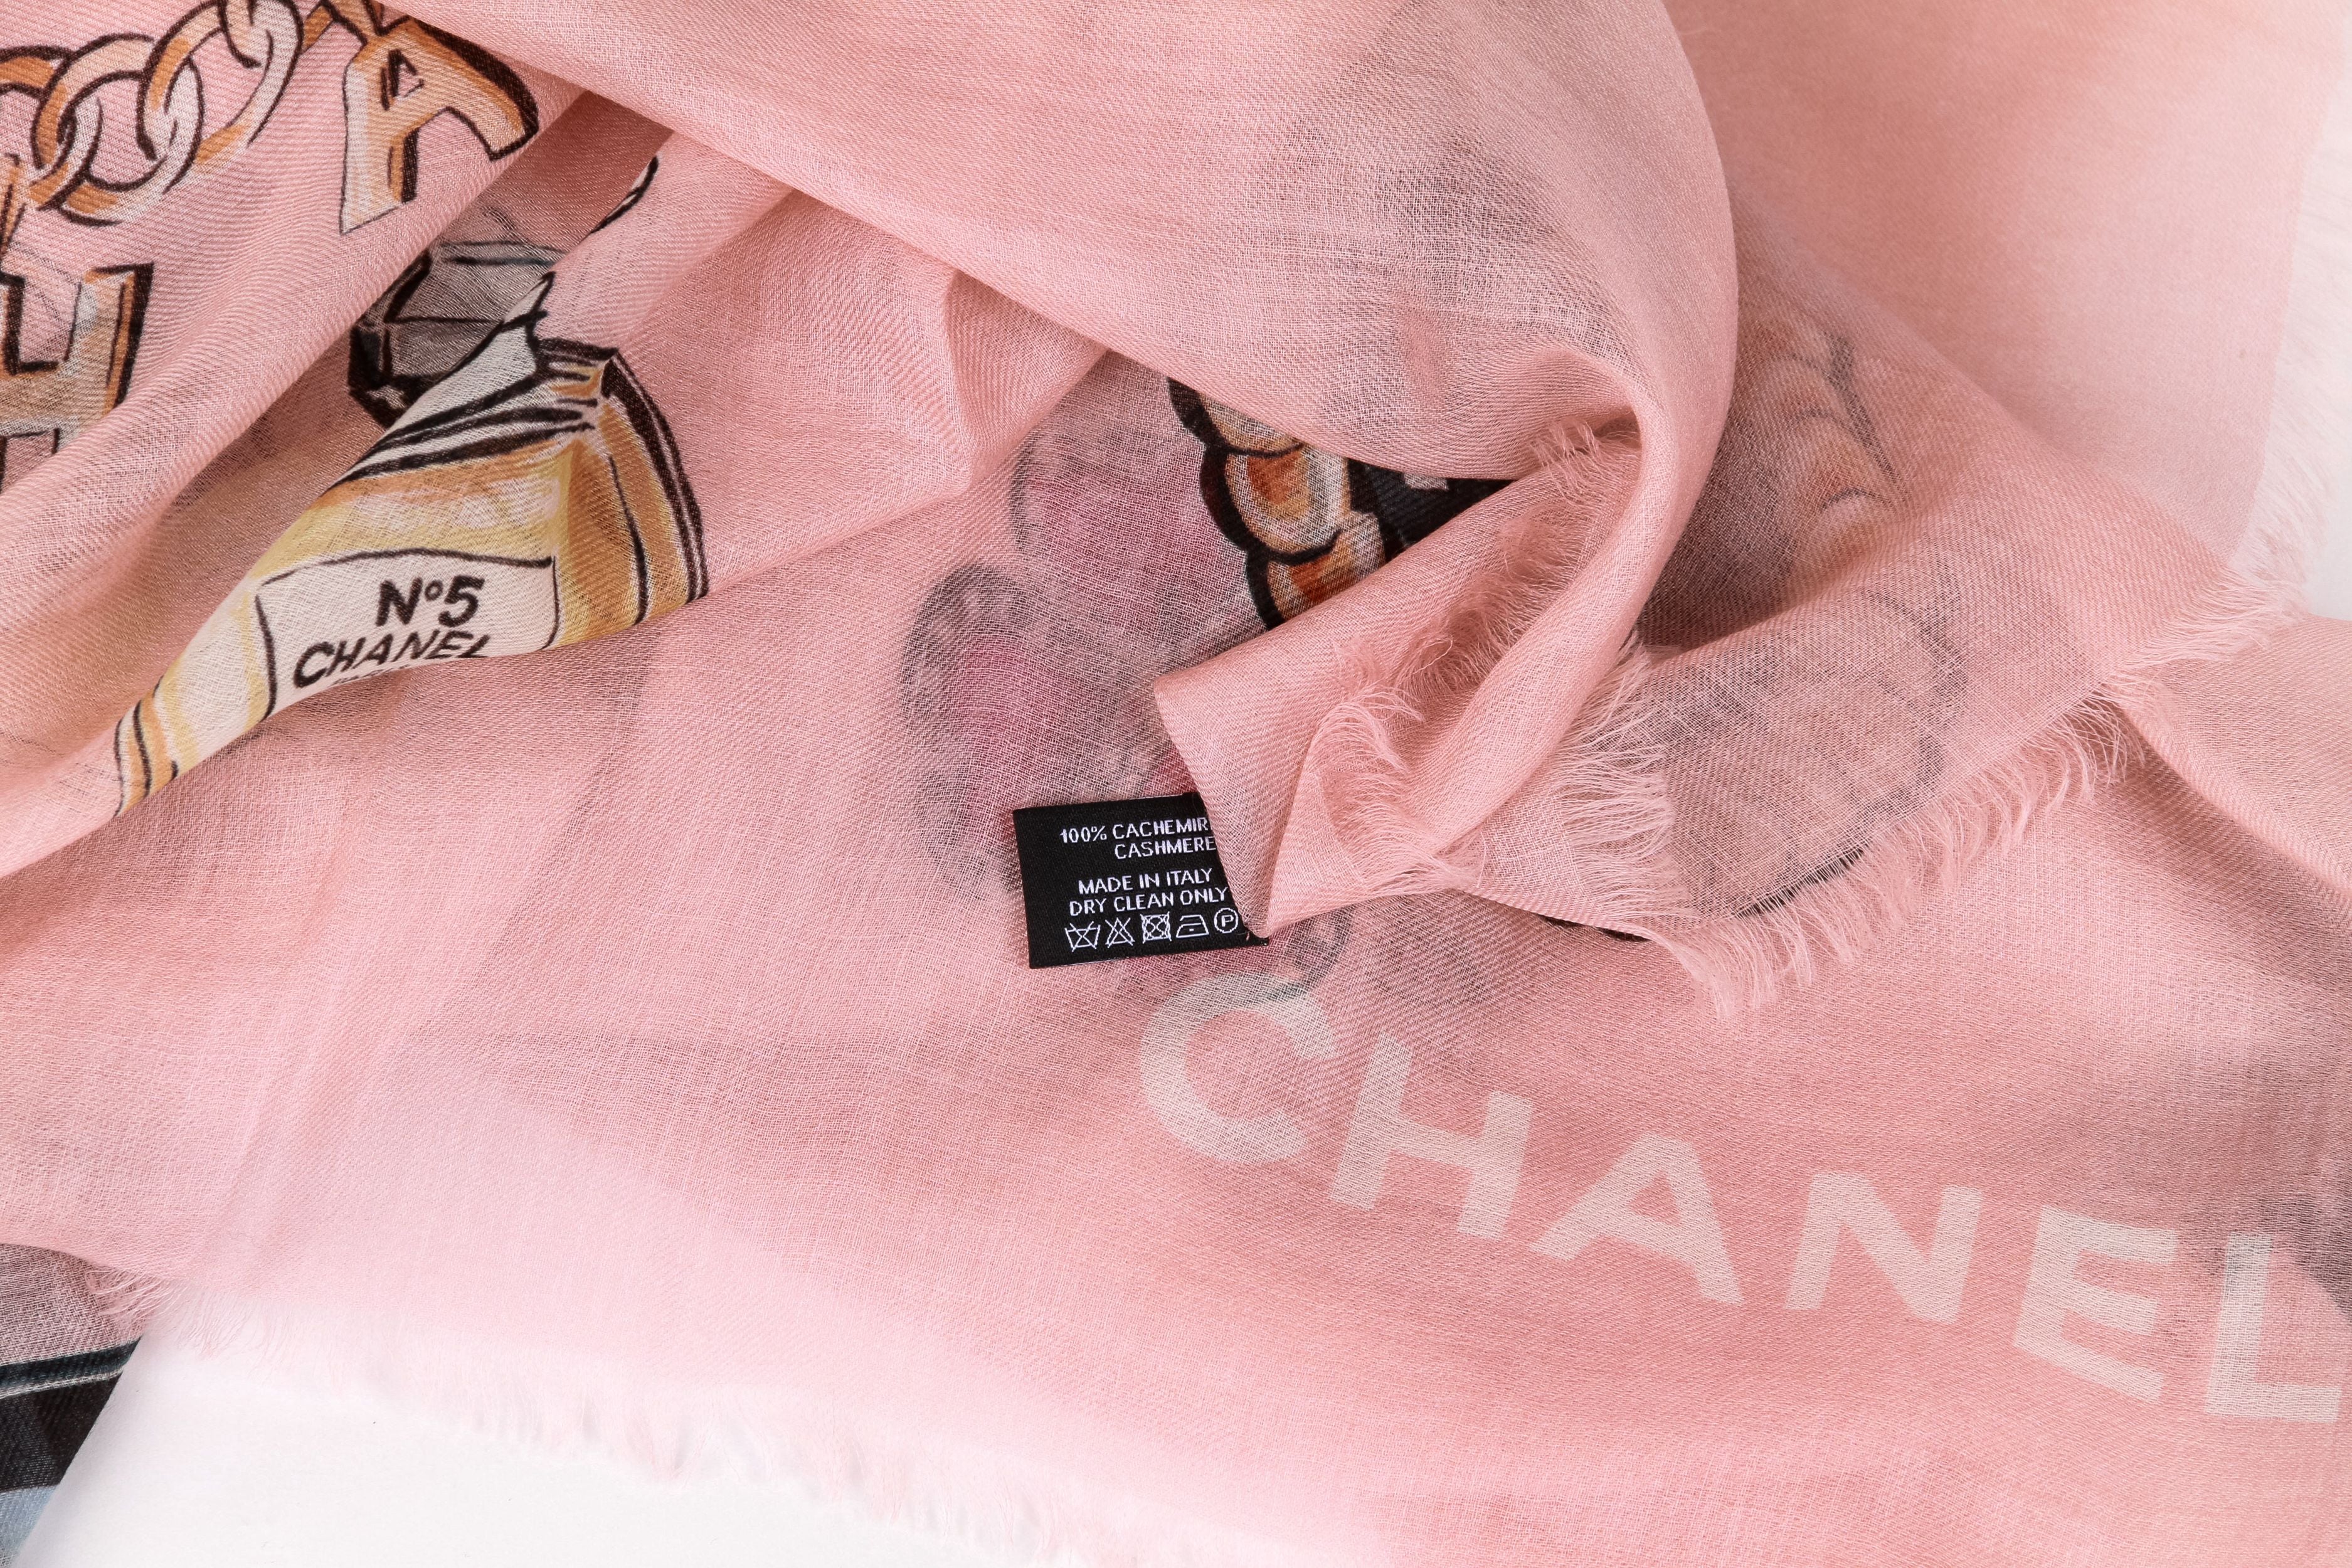 Chanel pink cashmere icons XL shawl - Vintage Lux